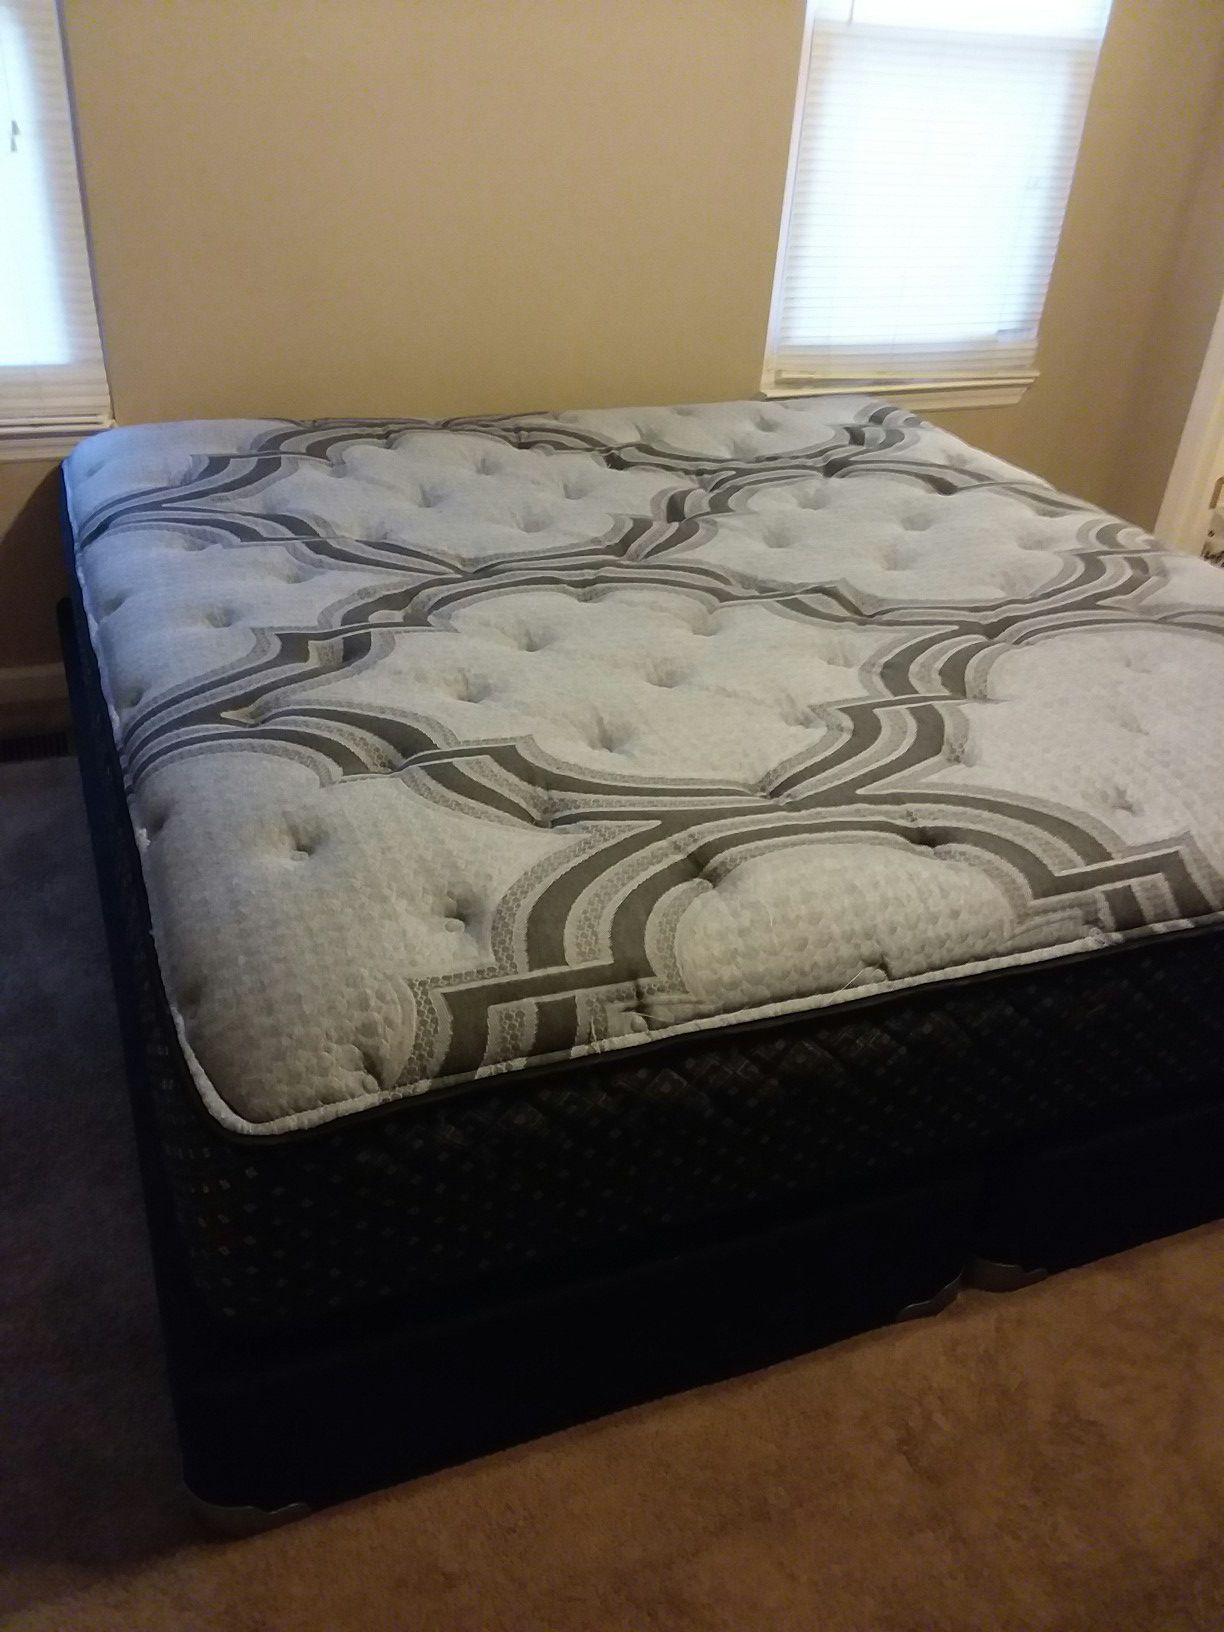 King mattress and box spring sets or separately